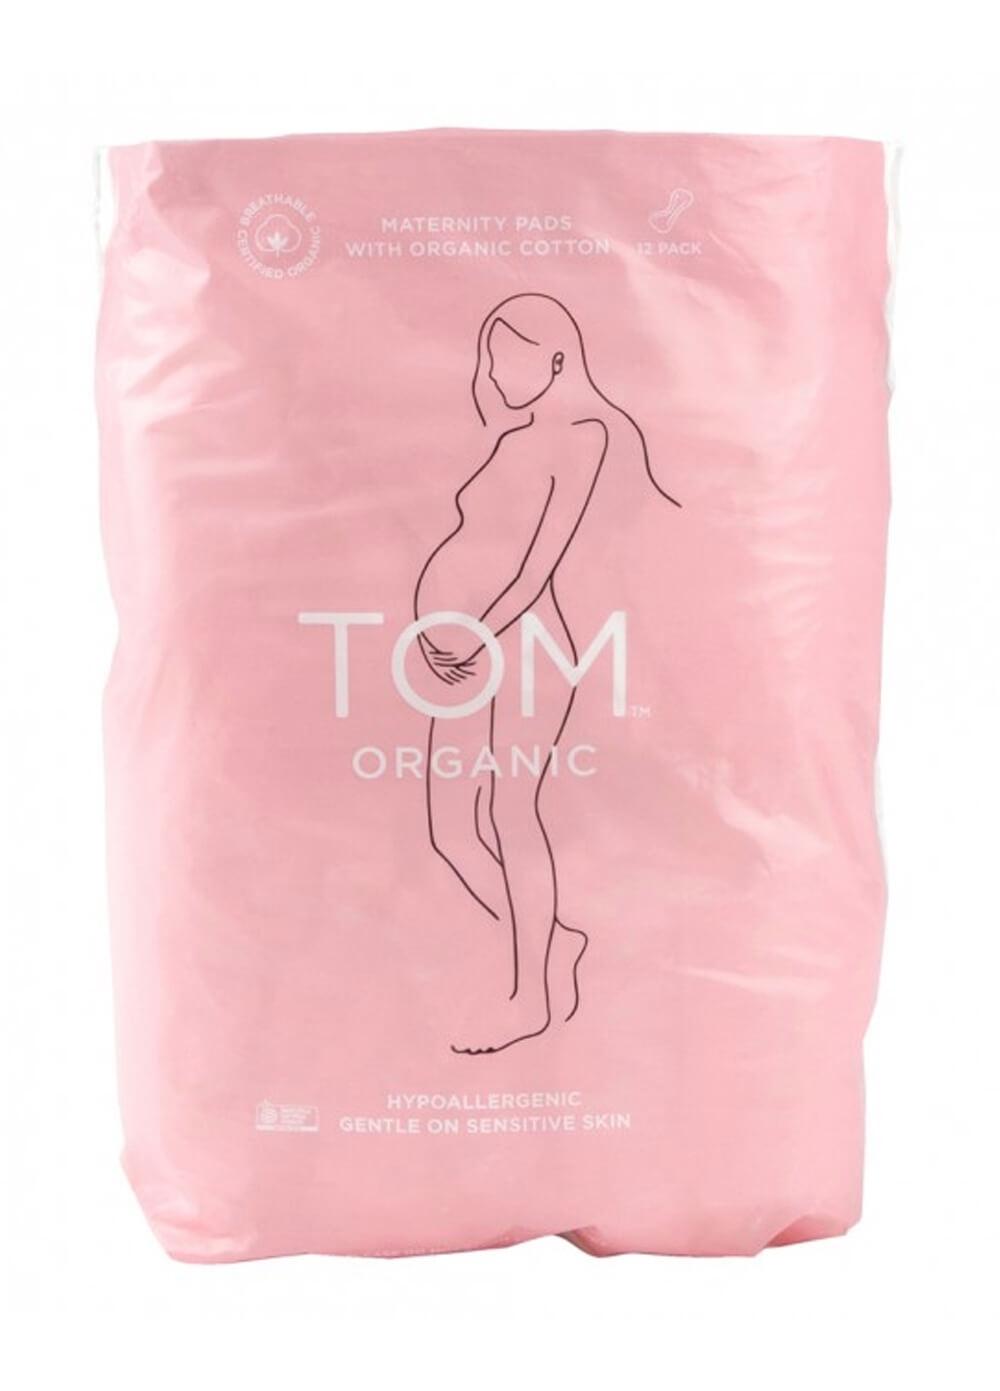 TOM Organic - Organic Cotton Maternity Pads (12 pack) | Queen Bee